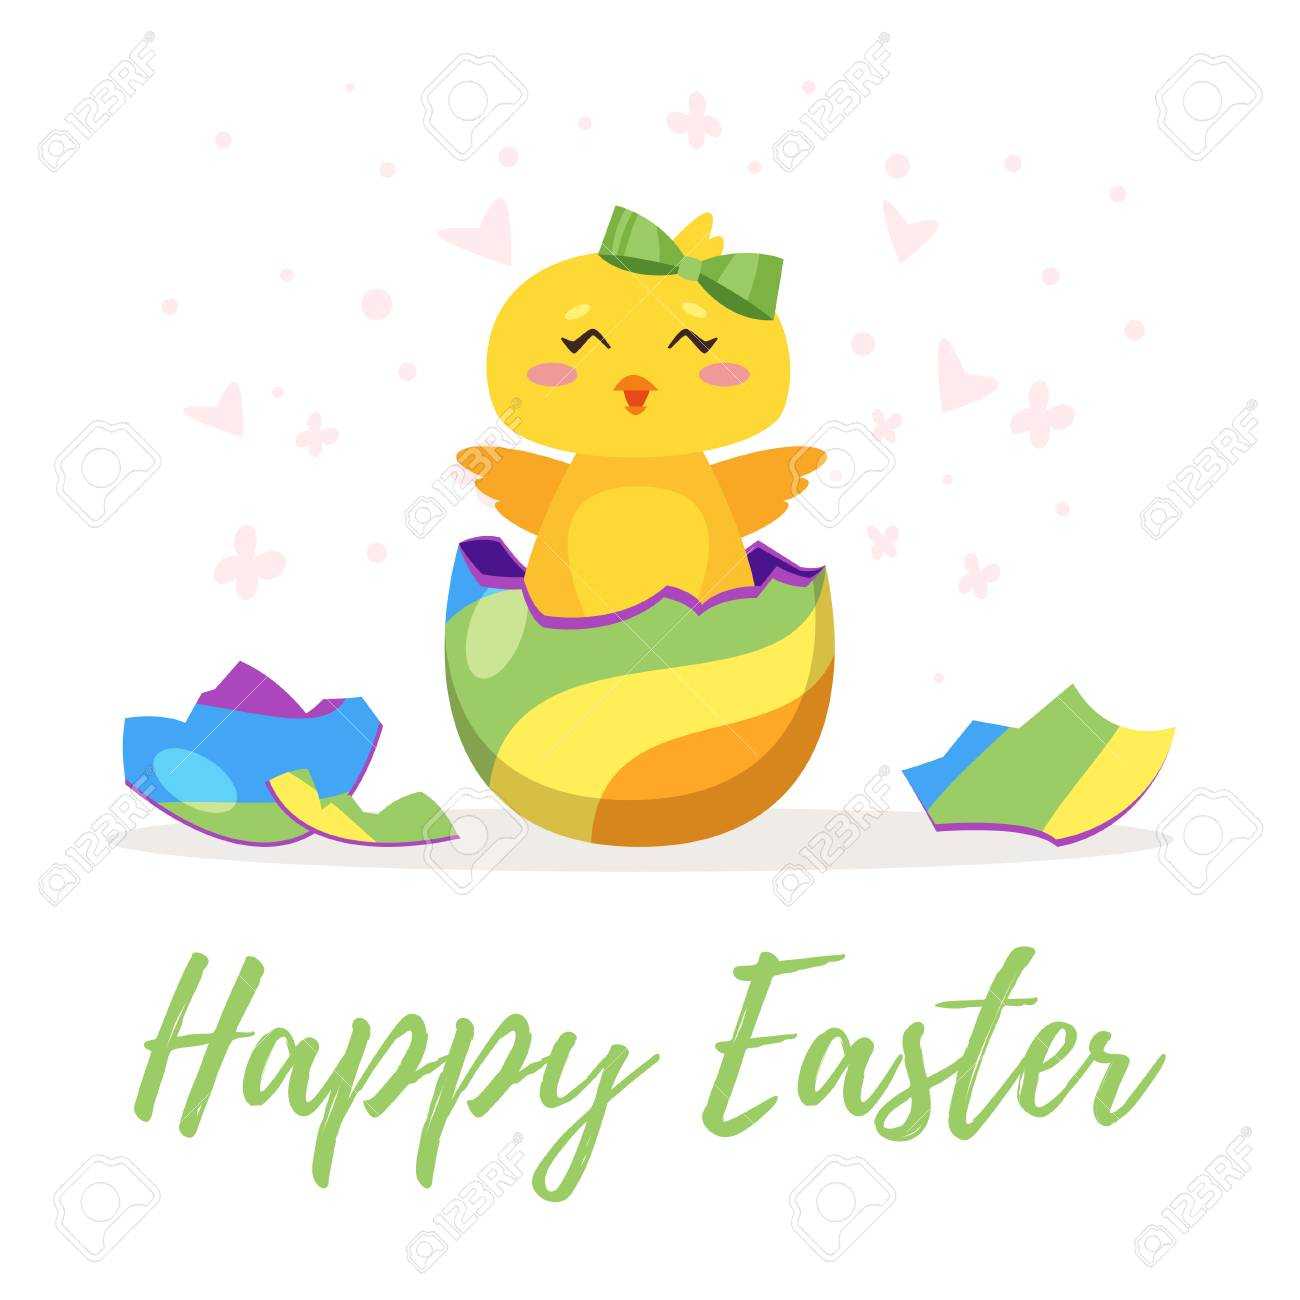 Easter Day Greeting Card Template With Cute Chick Hatched From.. Throughout Easter Chick Card Template